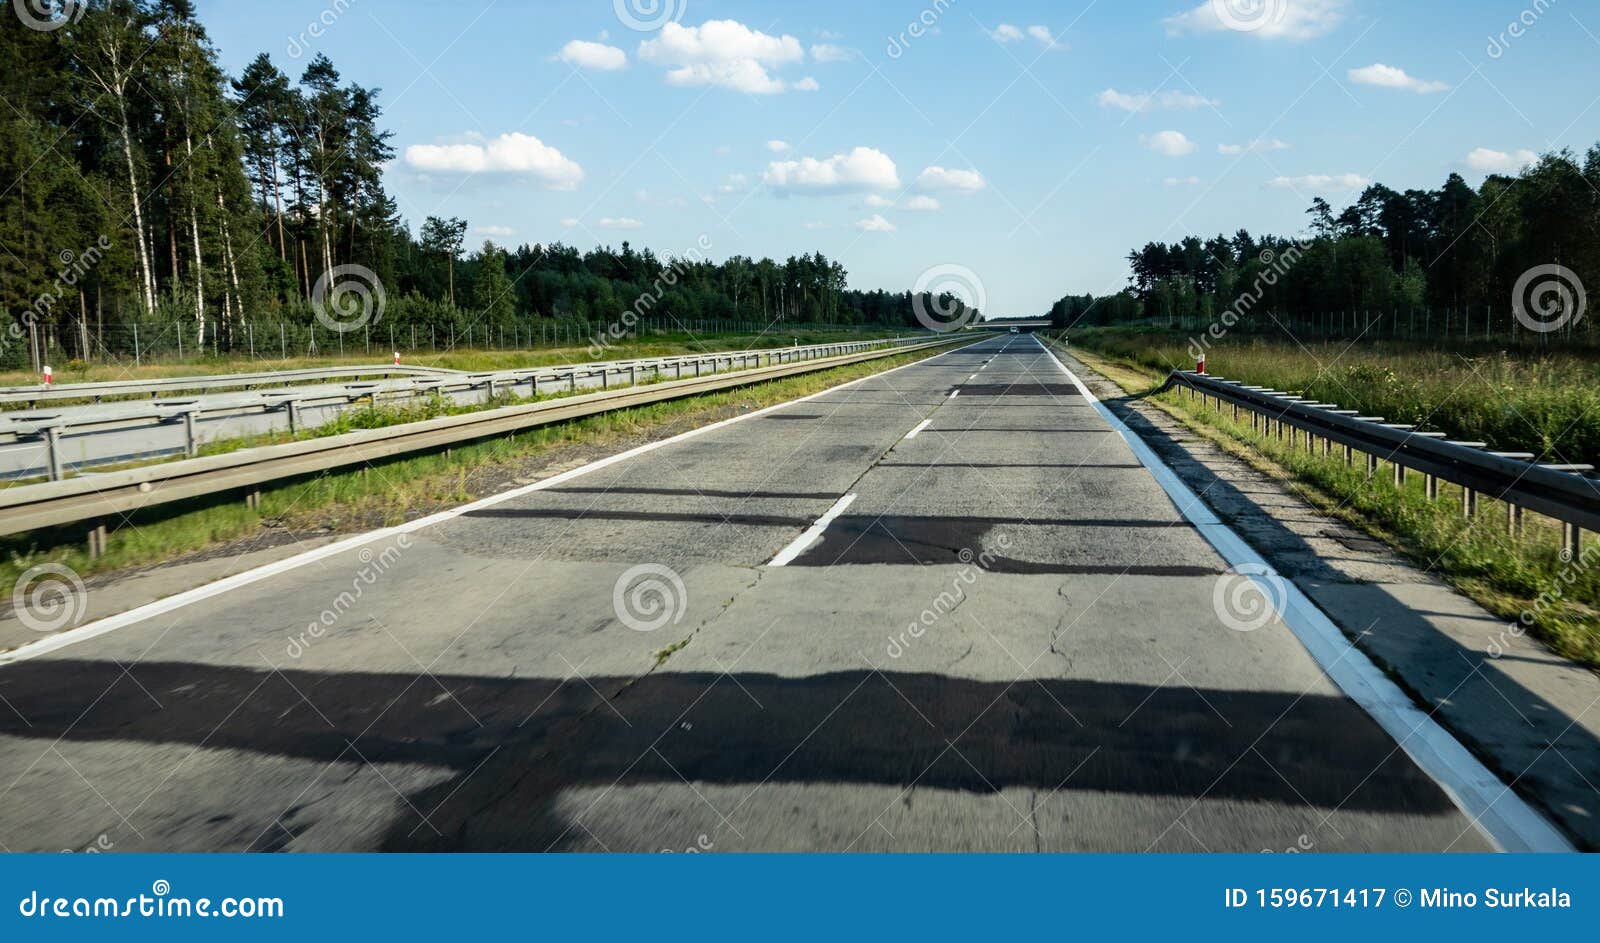 extremely bad highway a18 e36 in poland called droga hanby road of shame from cottbus to wroclaw with uneven surface and